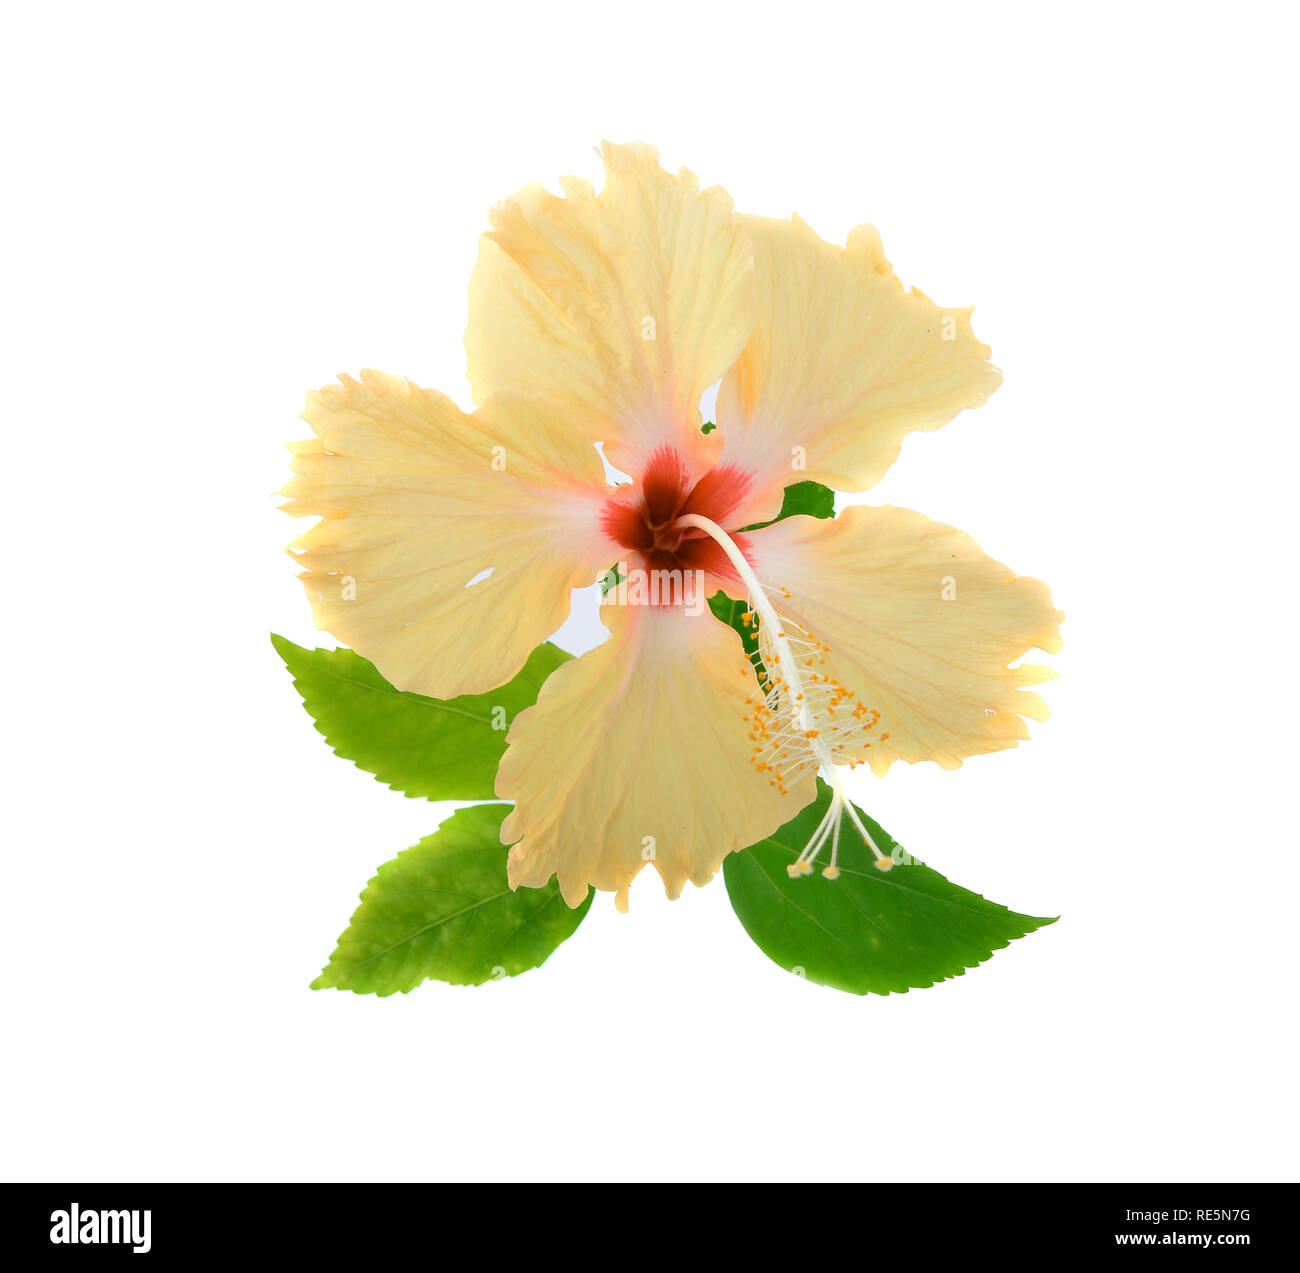 Yellow hibiscus flower isolated on white background Stock Photo